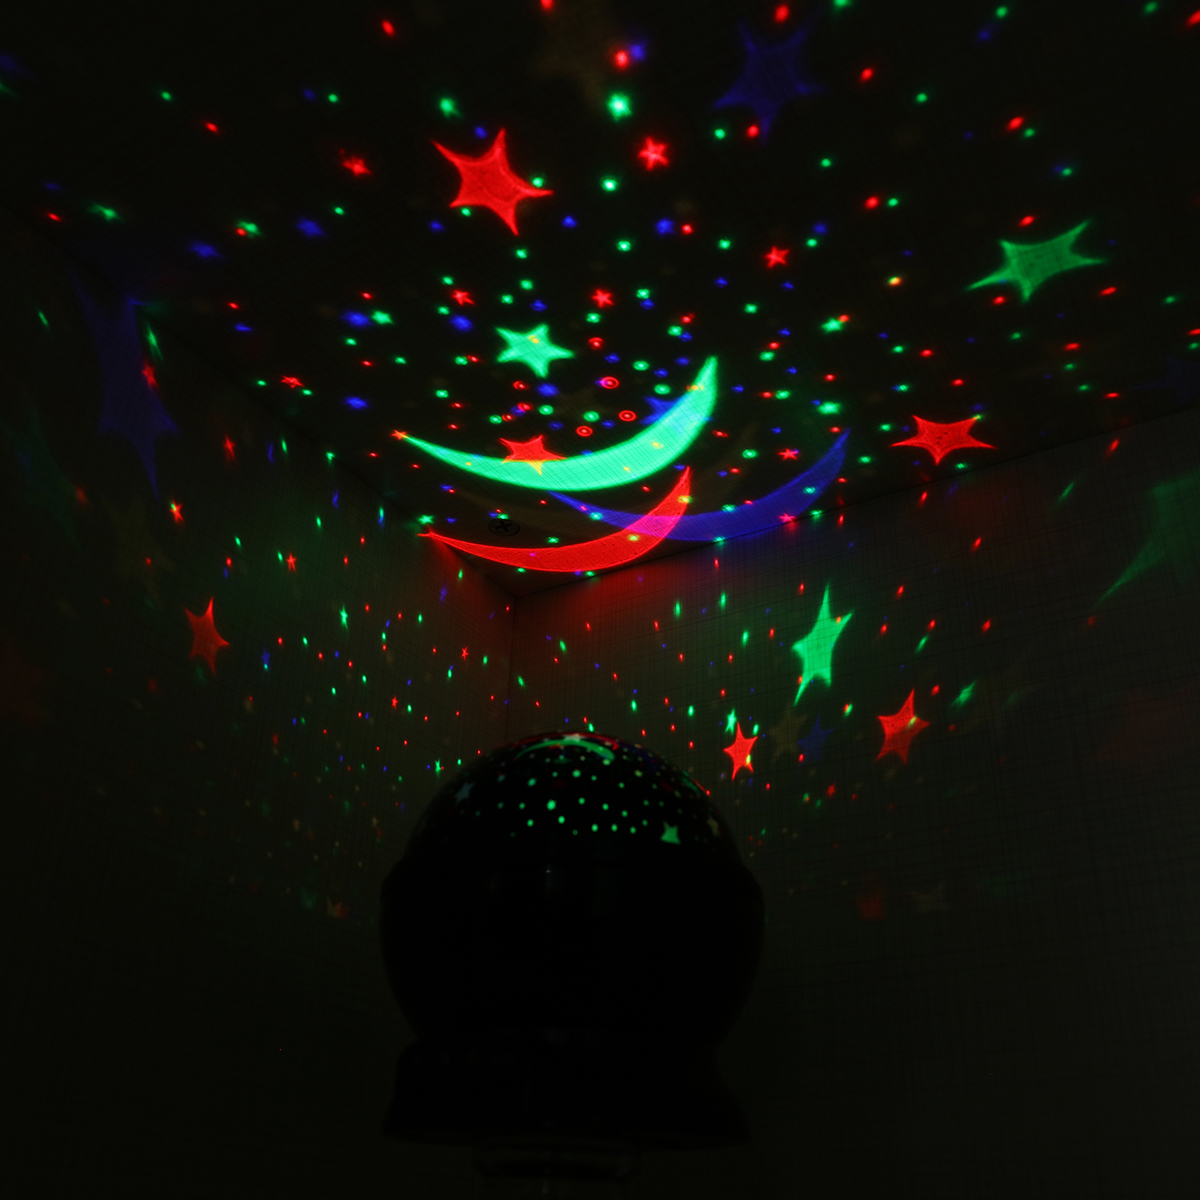 LED-Rotating-Night-Light-Projector-Starry-Sky-Star-Projection-Lamp-Childrens-Room-Decorated-Lights-1638181-2